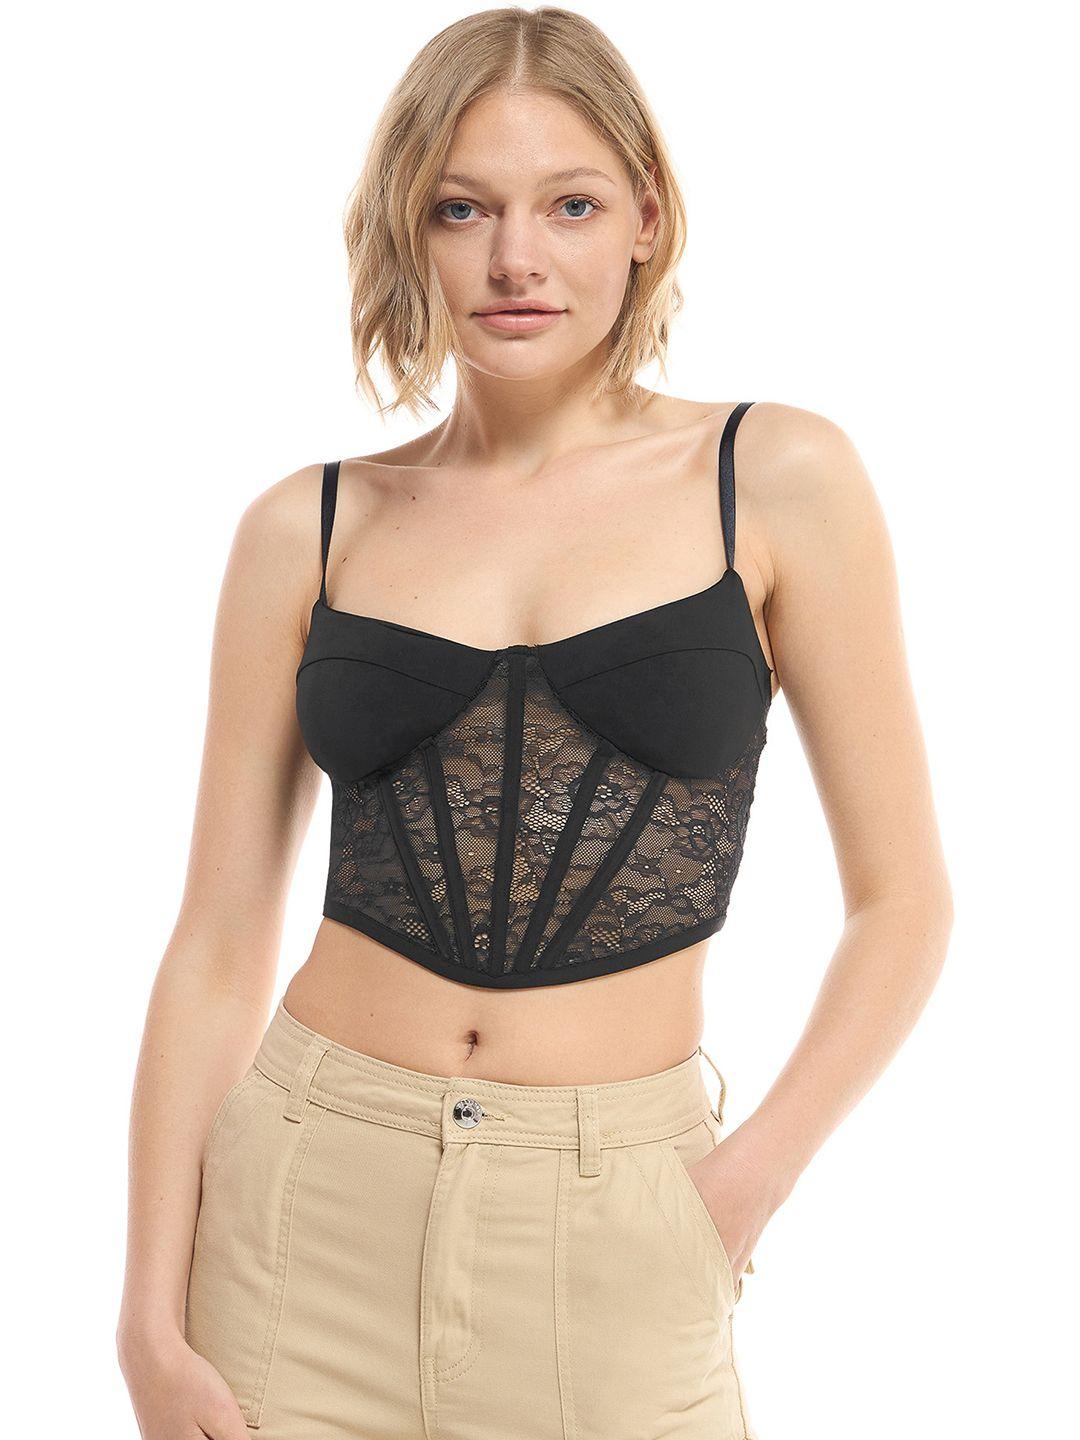 terranova lace inserted crop top